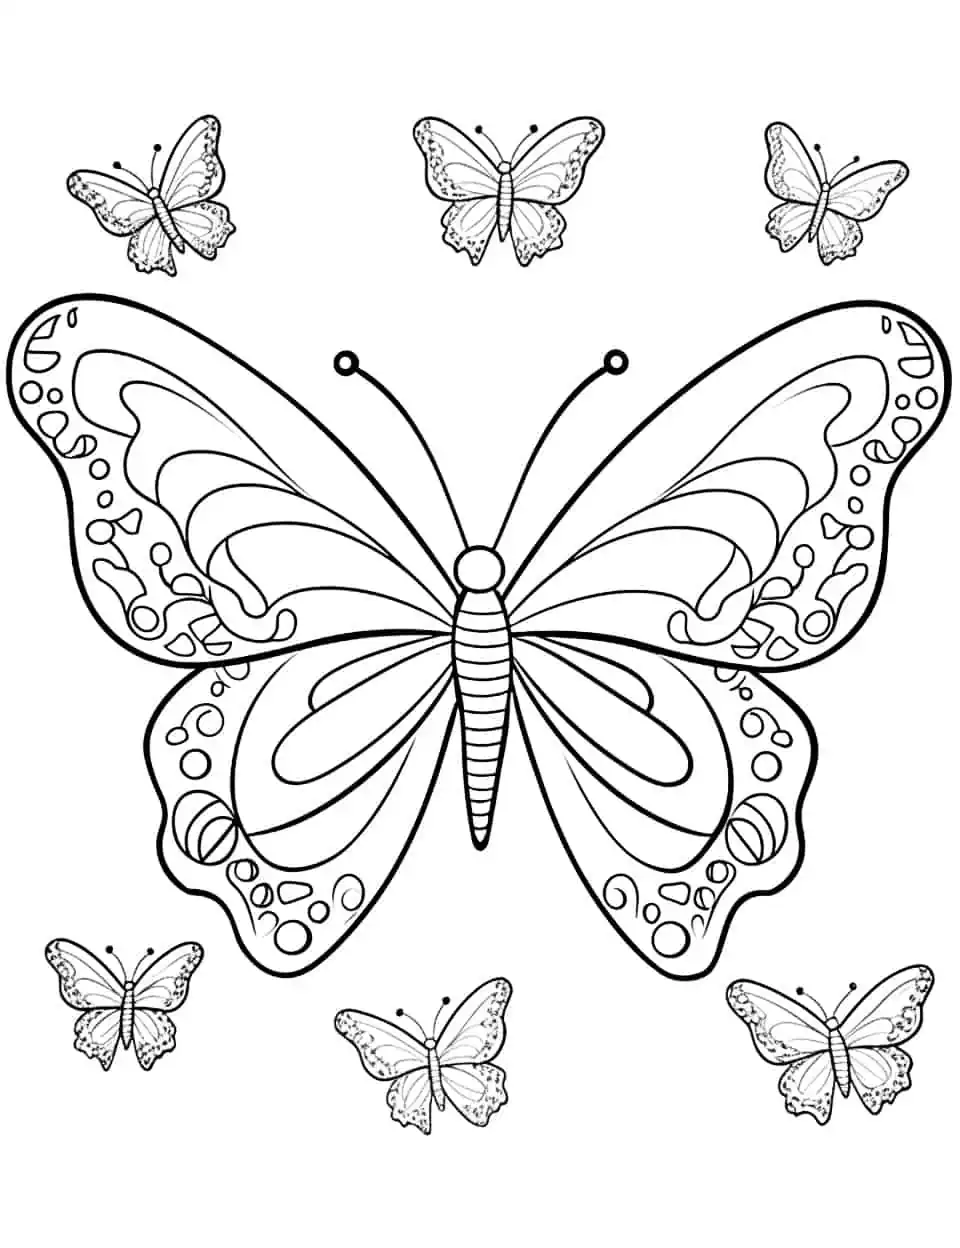 Whimsical Wings Butterfly Coloring Page - A whimsical coloring page showcasing butterflies with playful patterns and designs.